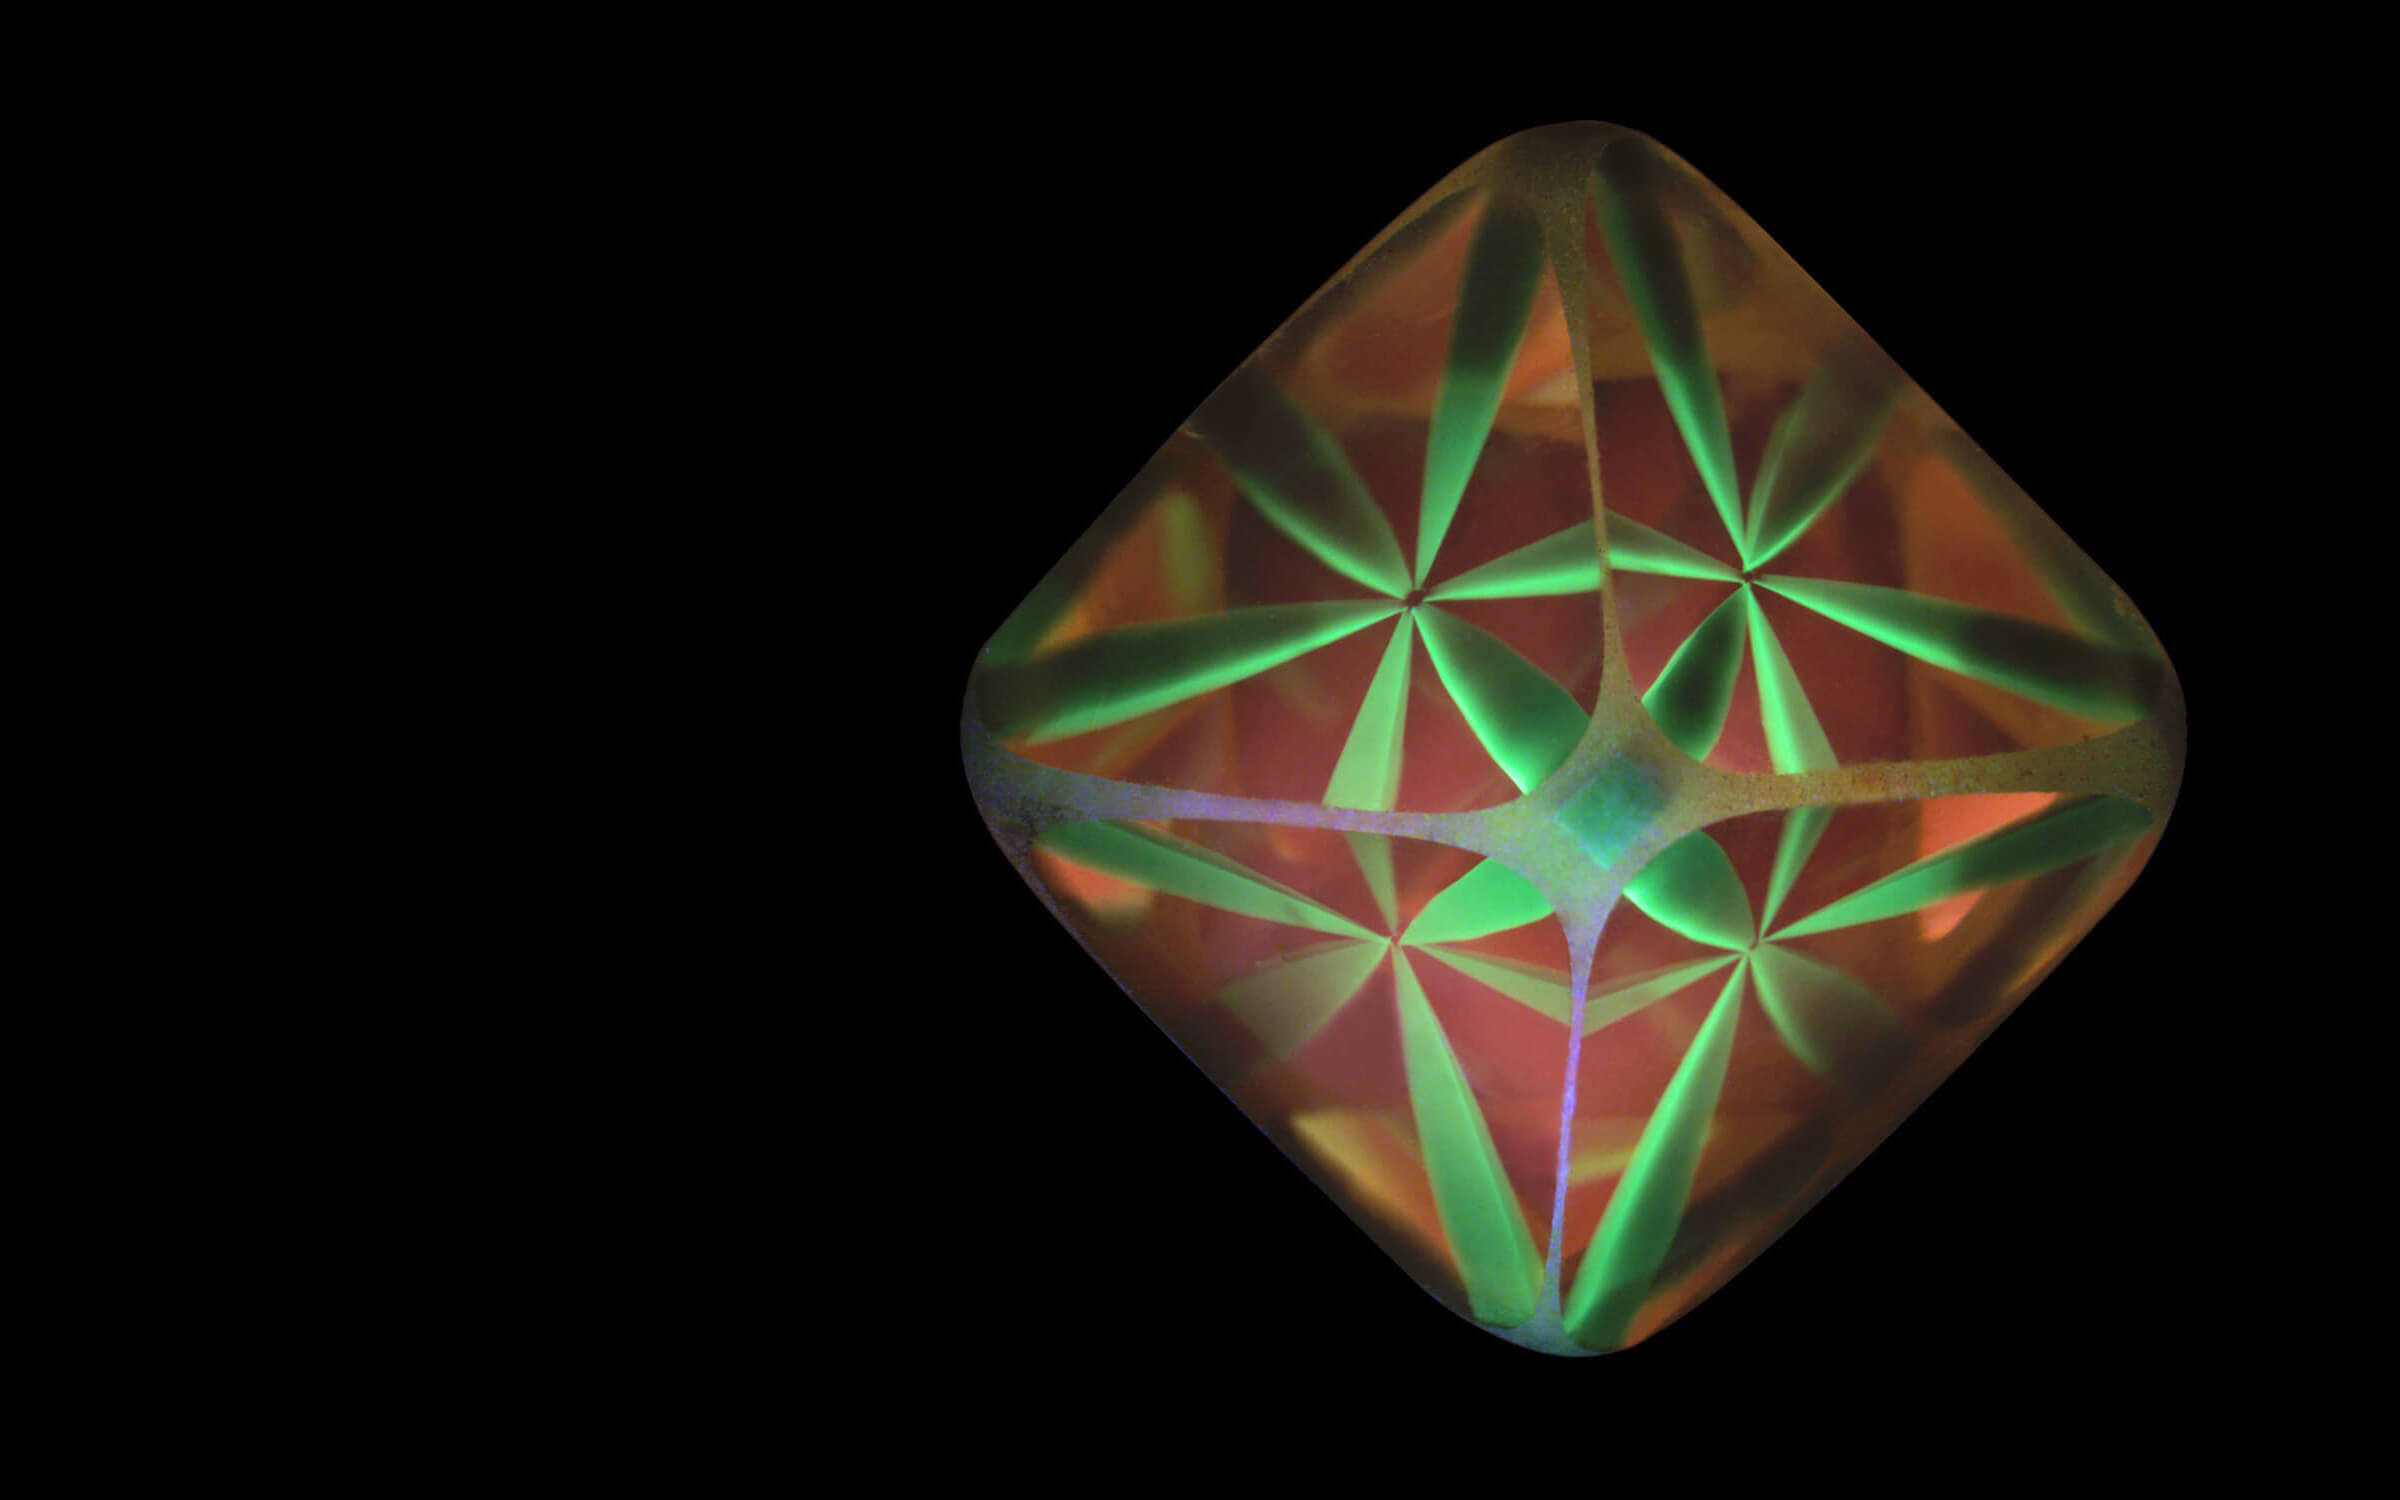 Two-tone luminescent structure in a rough diamond